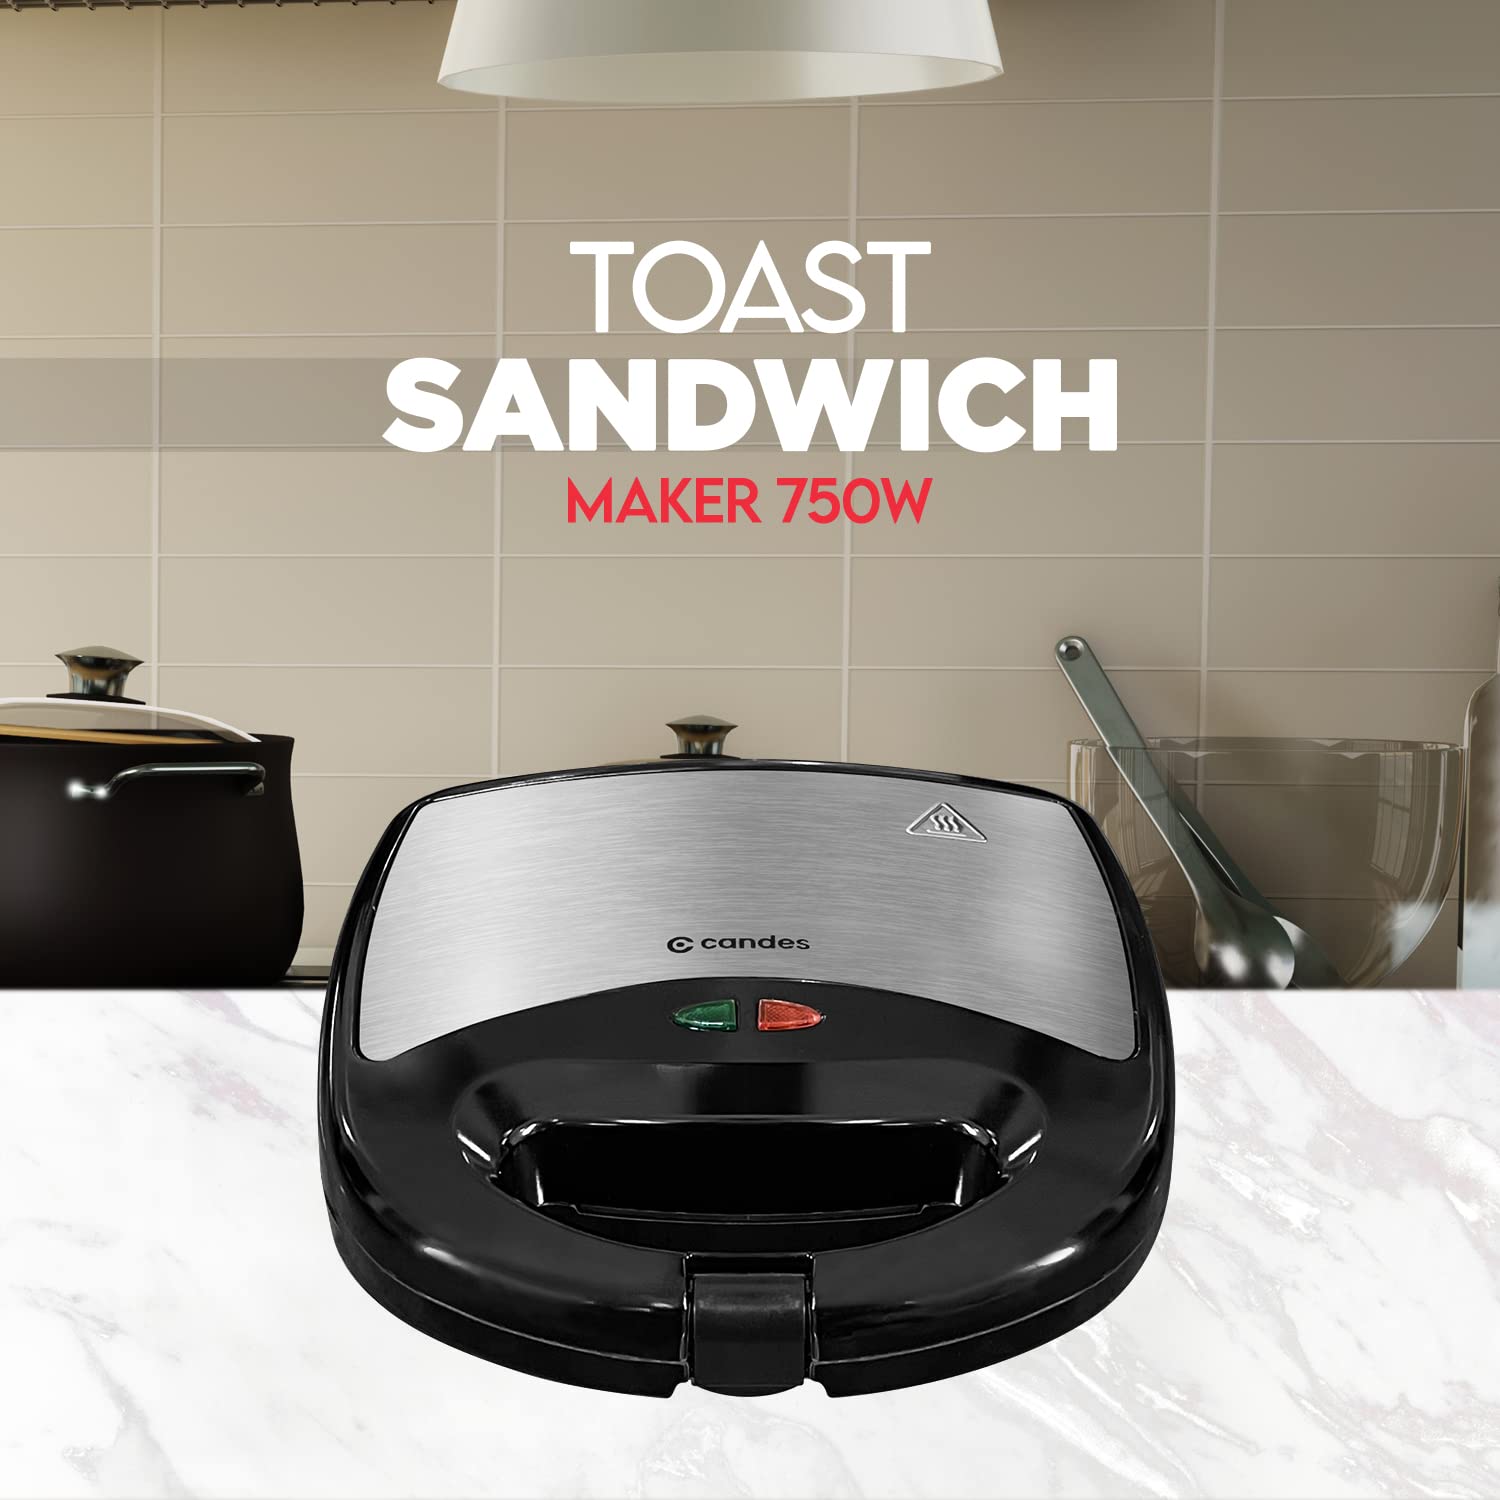 Candes Crunch Sandwich Toaster 4 Slices Non-Stick Fixed with Sandwich Plated Plates - 750 W (1 Year Warranty) Black & Silver